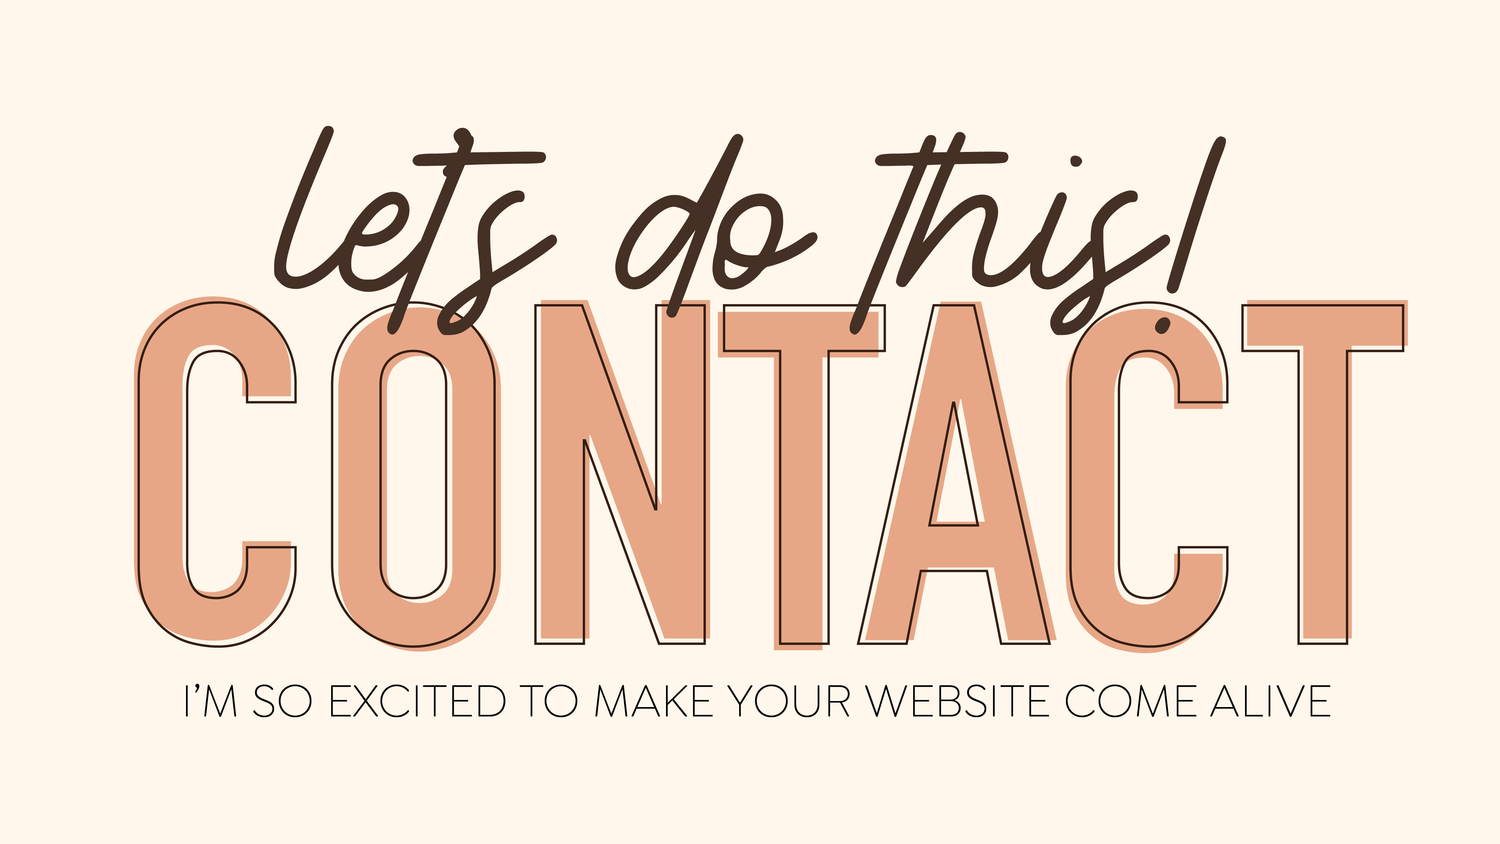 Contact page.  I'm so excited to make your website come alive.  Let's do this!